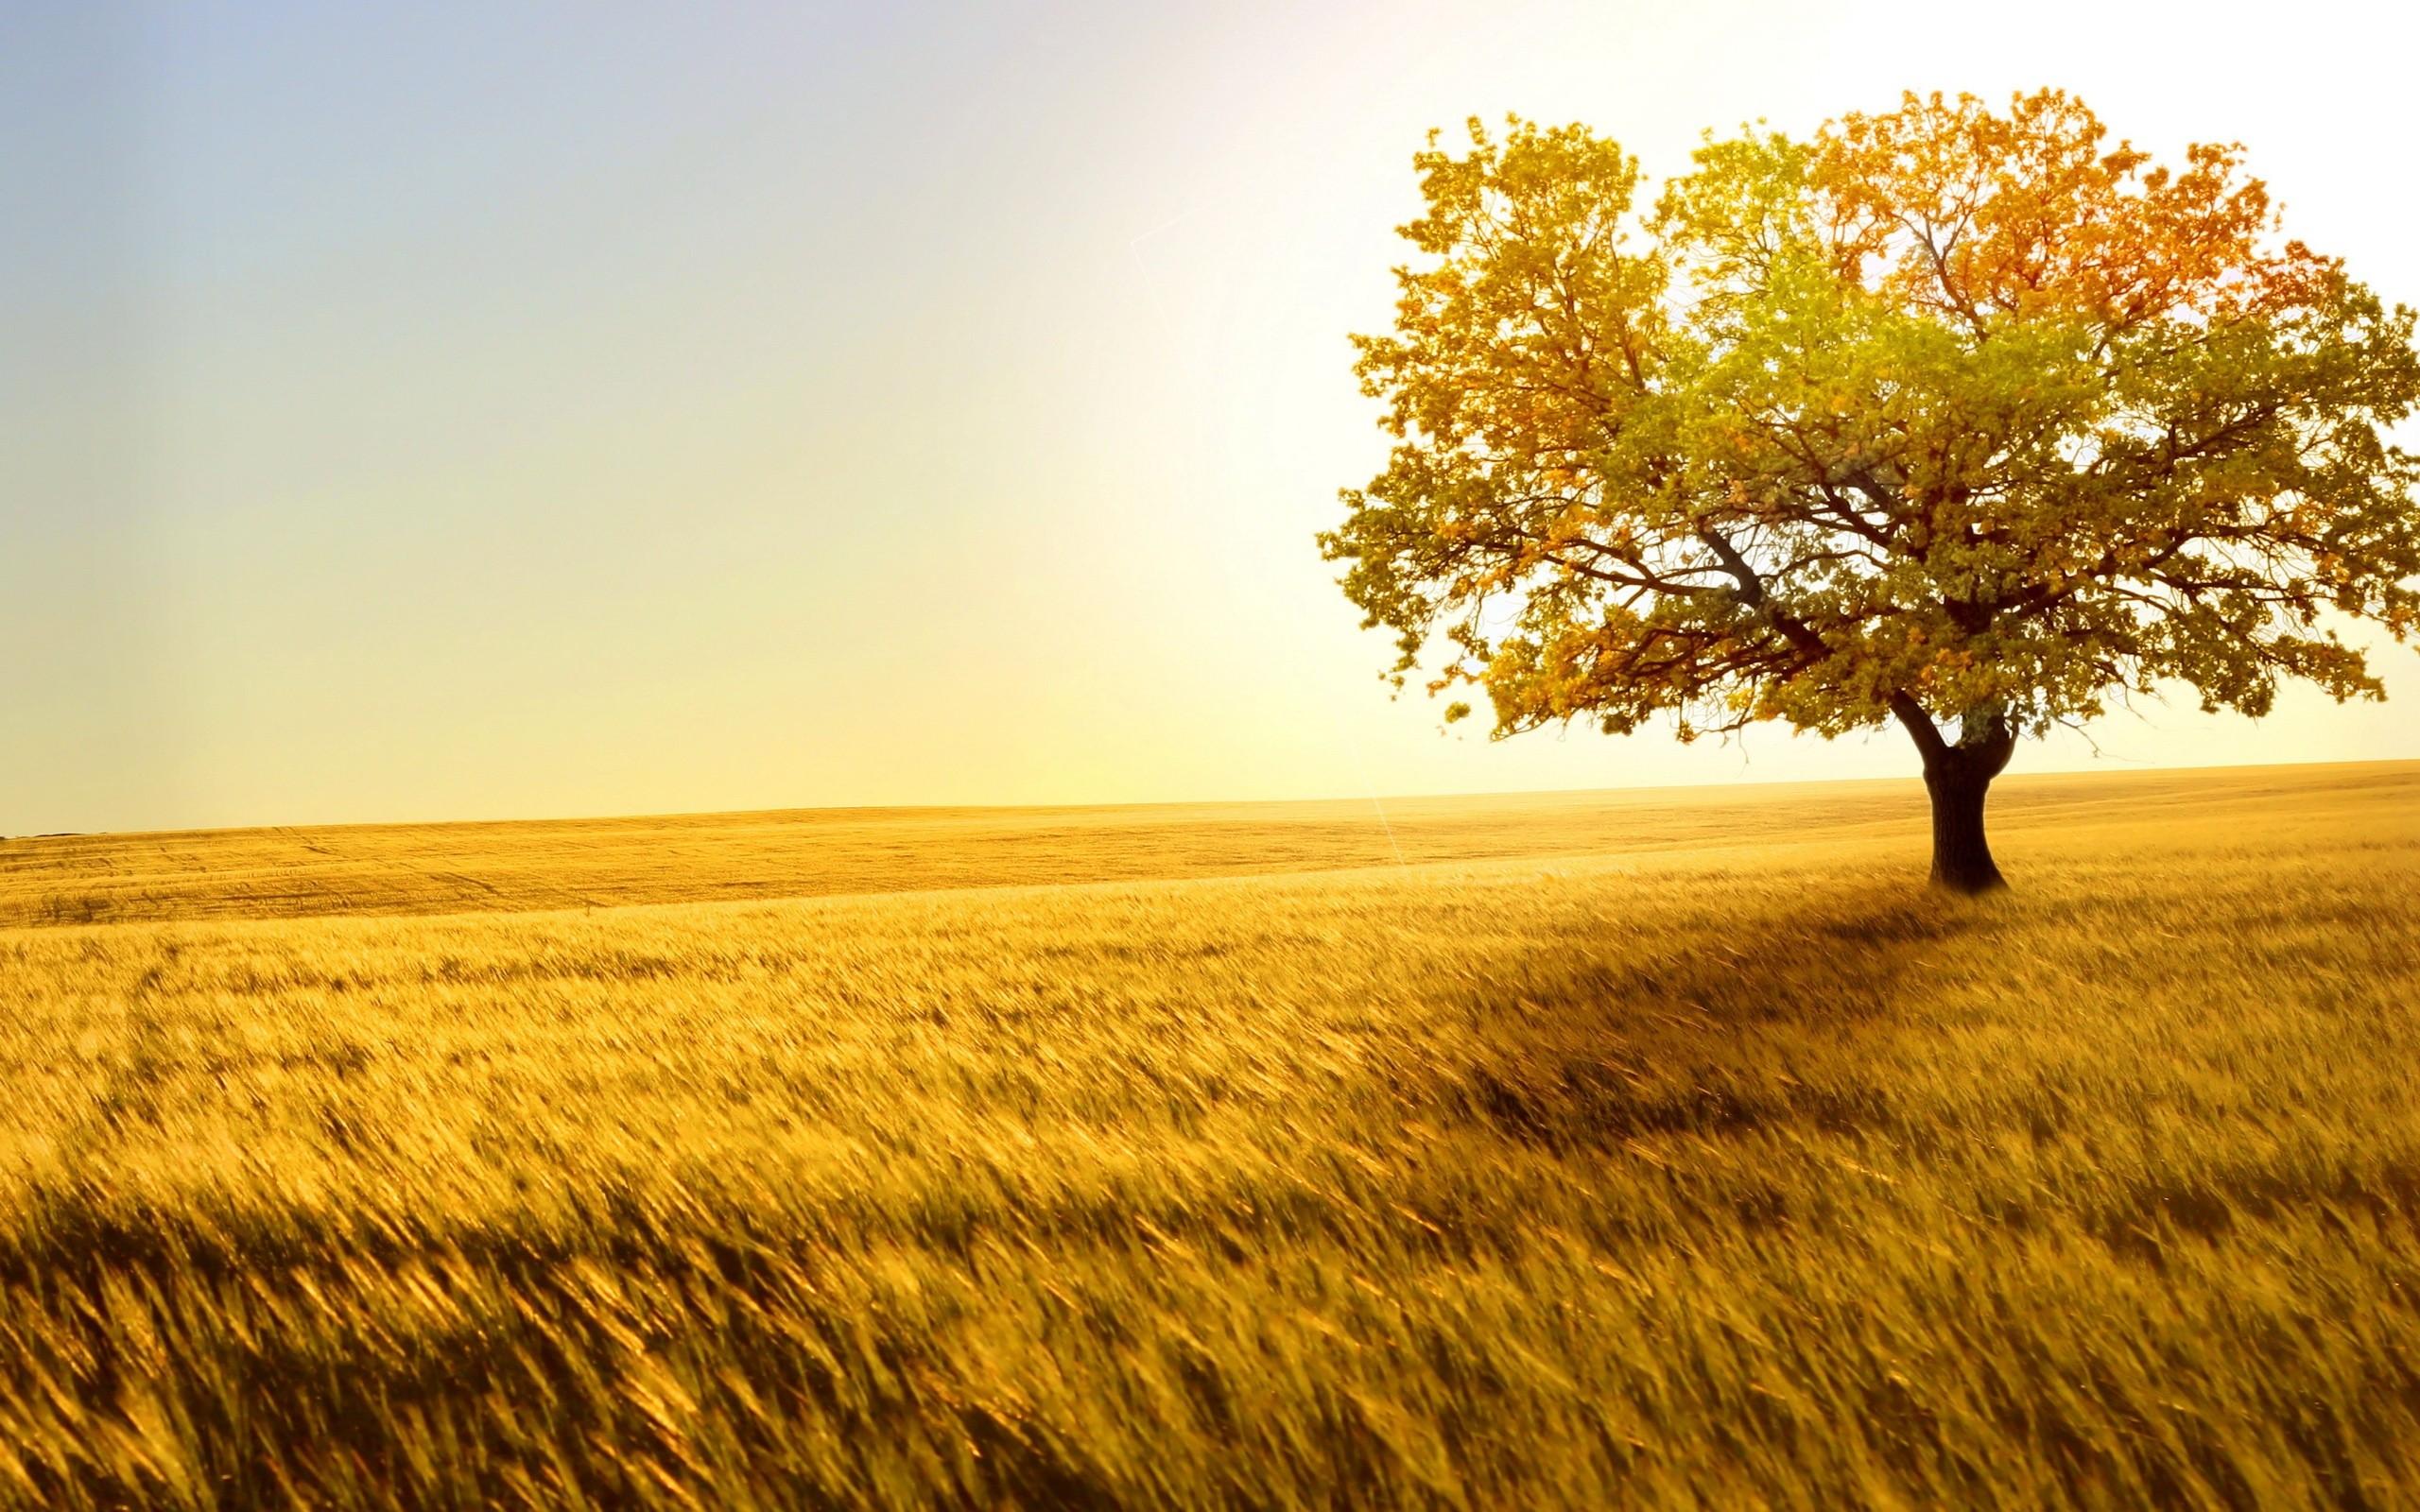 The Tree And Haystack Field Wallpapers